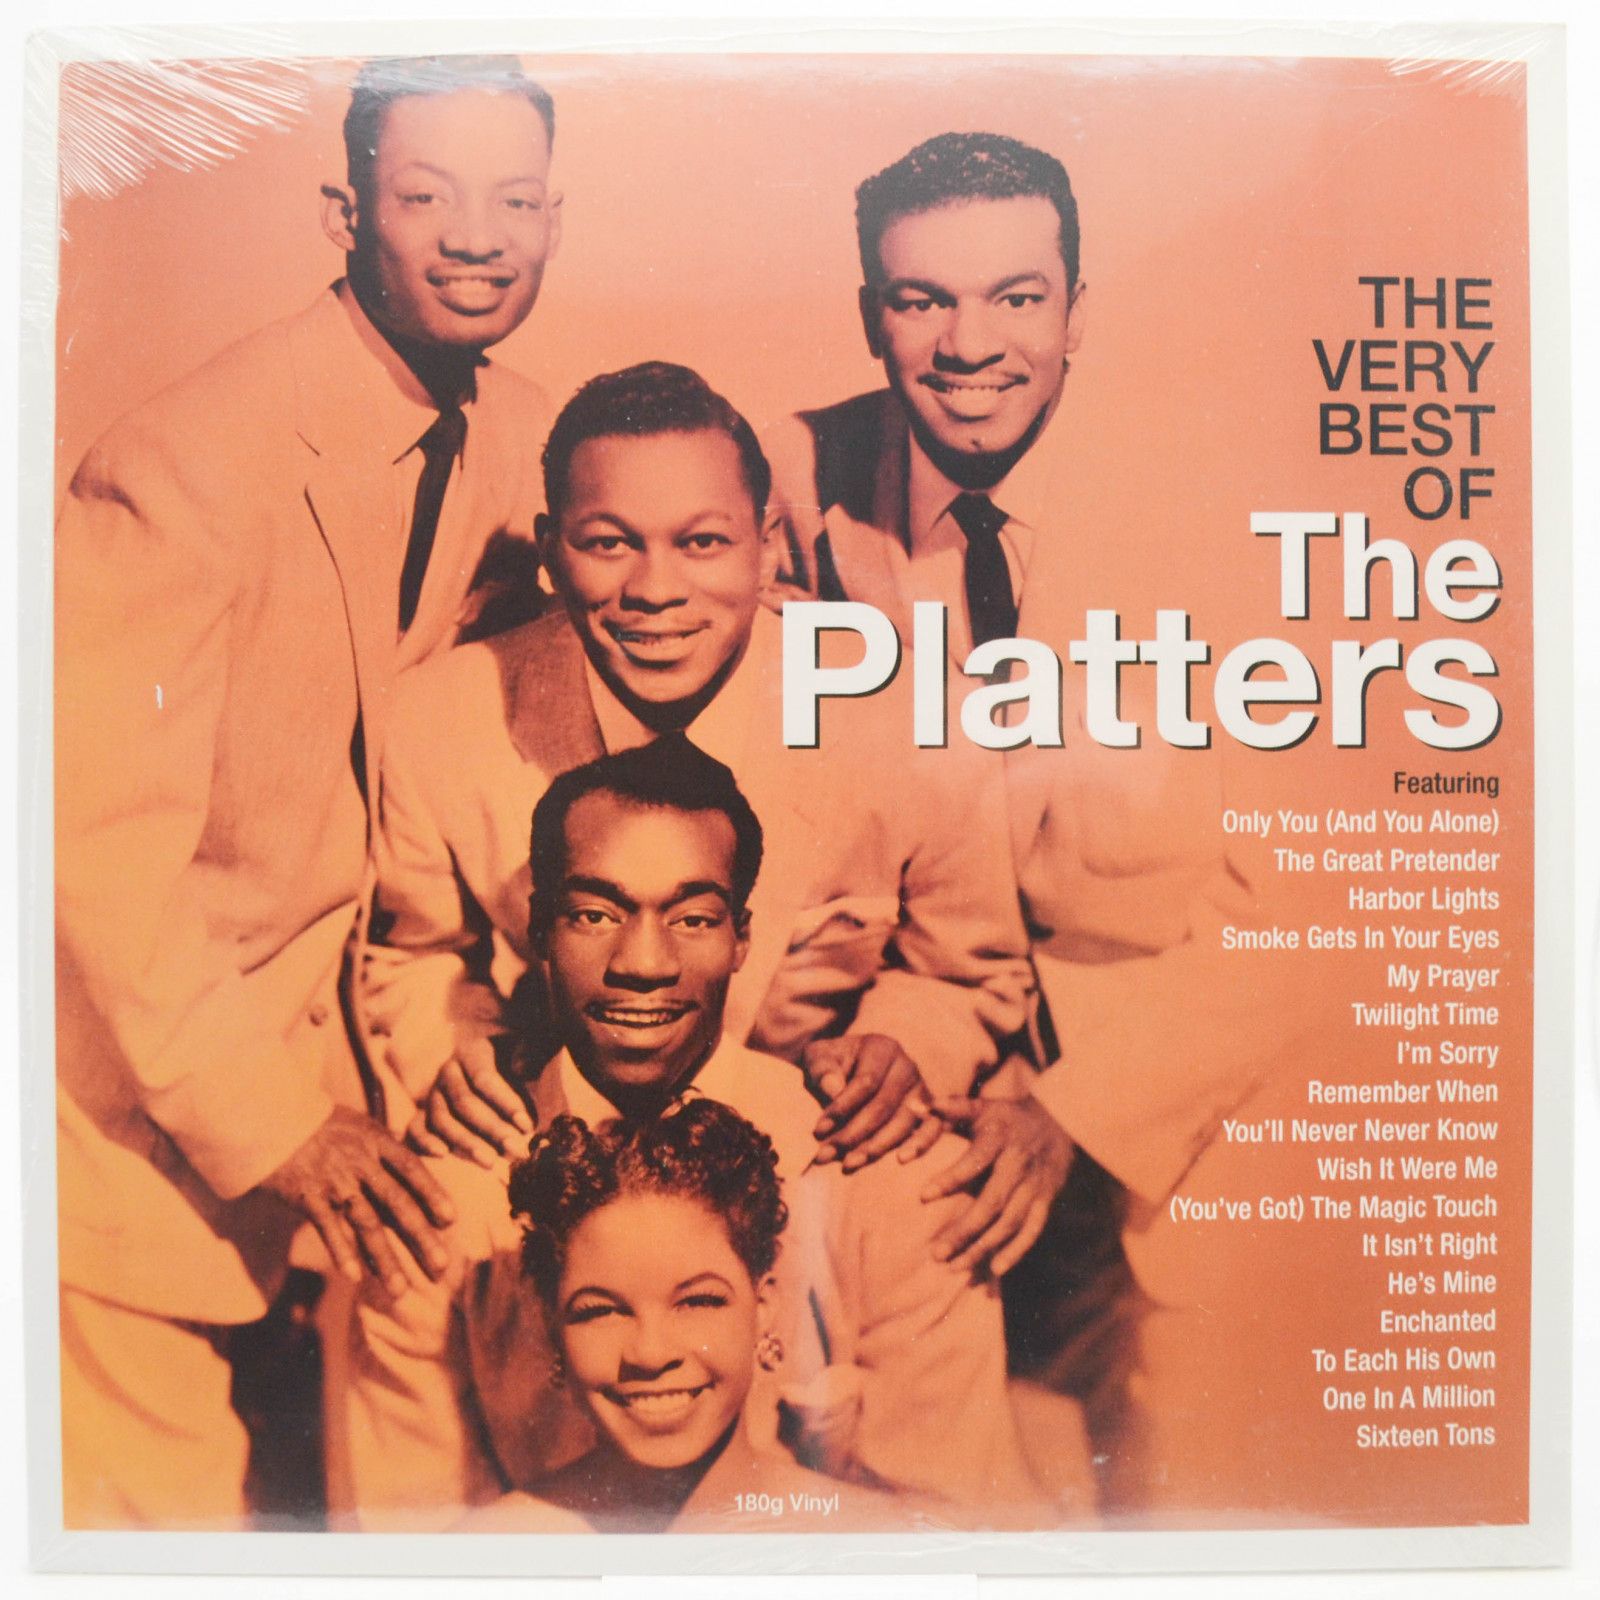 Platters — The Very Best Of The Platters (UK), 2020